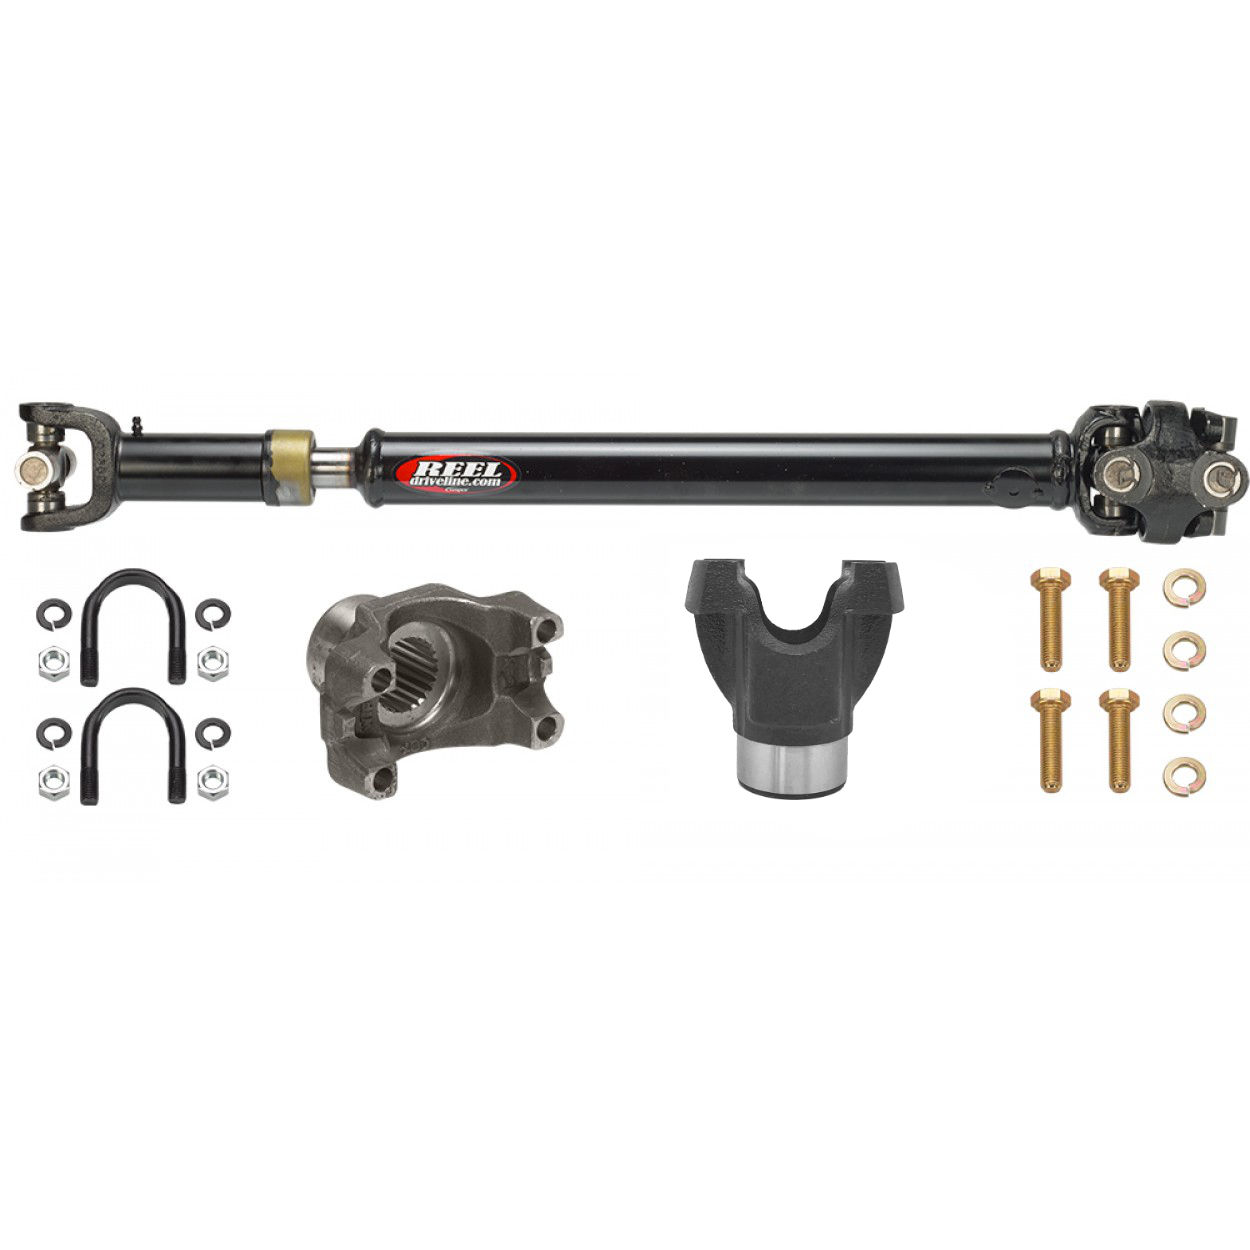 jeep-wrangler-jl-1310-heavy-duty-front-driveshaft-with-double-cardan-joint-2-or-4-door-aut-2